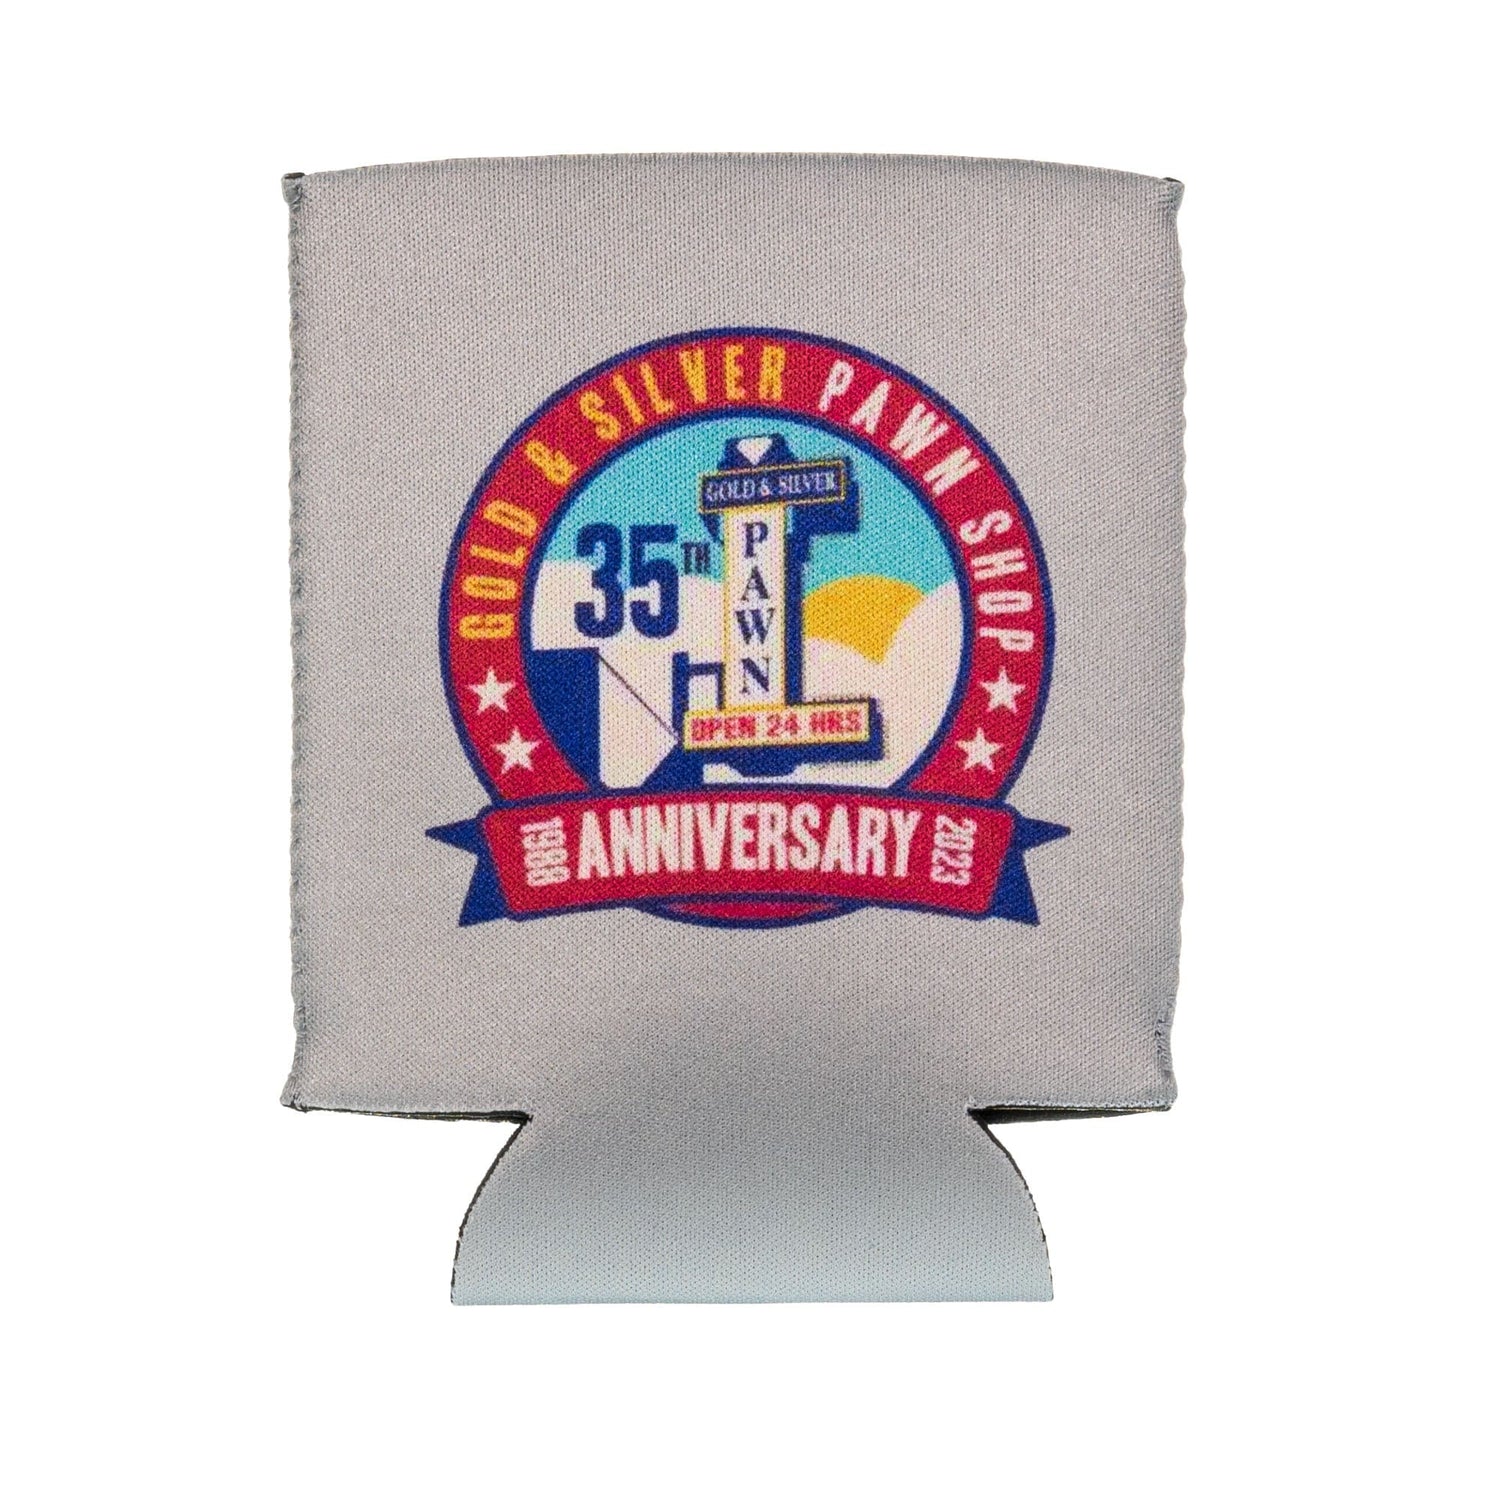 Gold & Silver Pawn Shop 35th Anniversary Cup Koozie Grey 